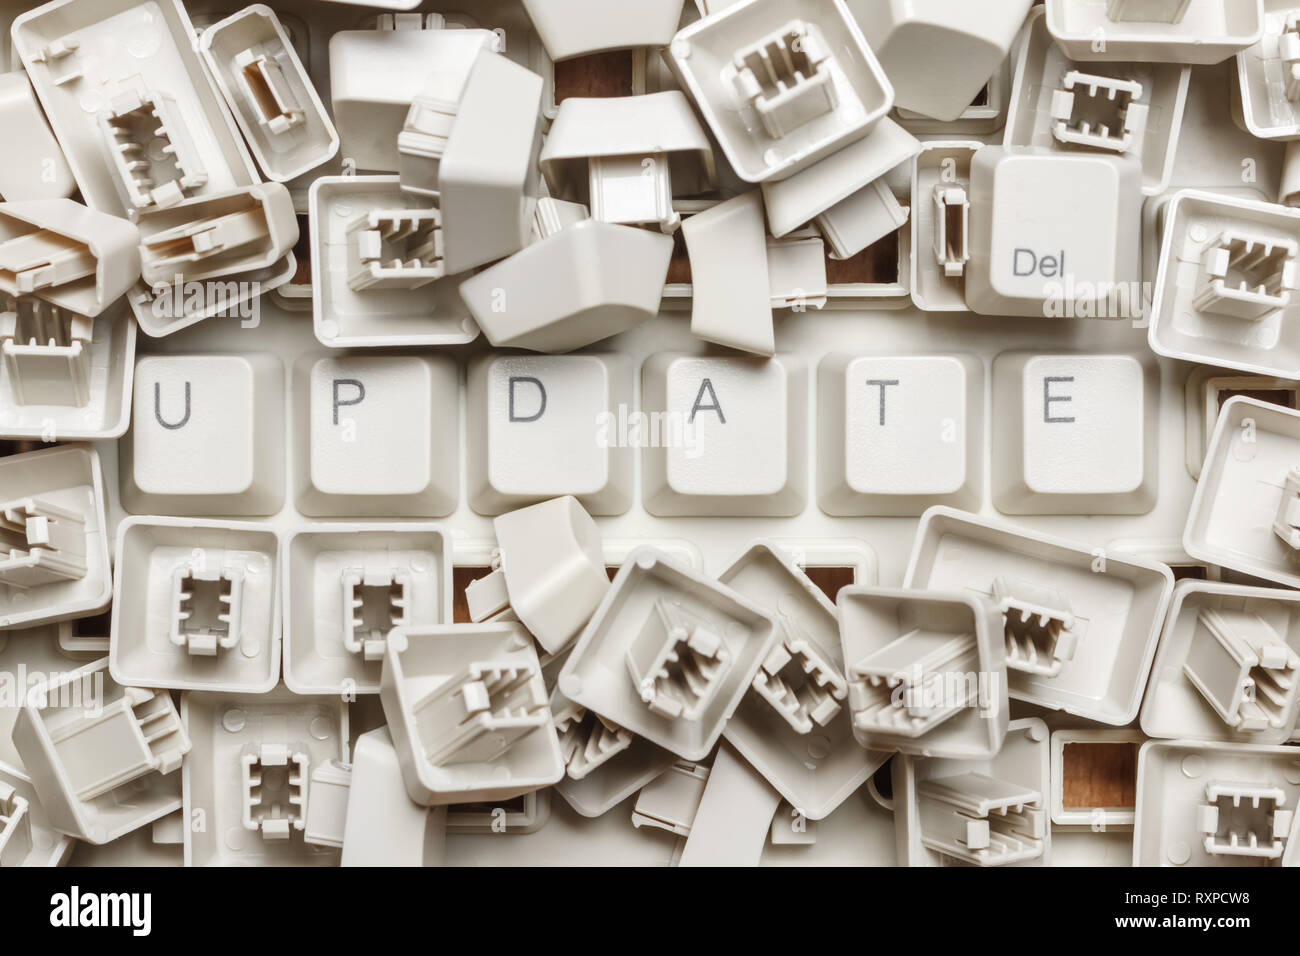 Word update from a heap of computer keys Stock Photo